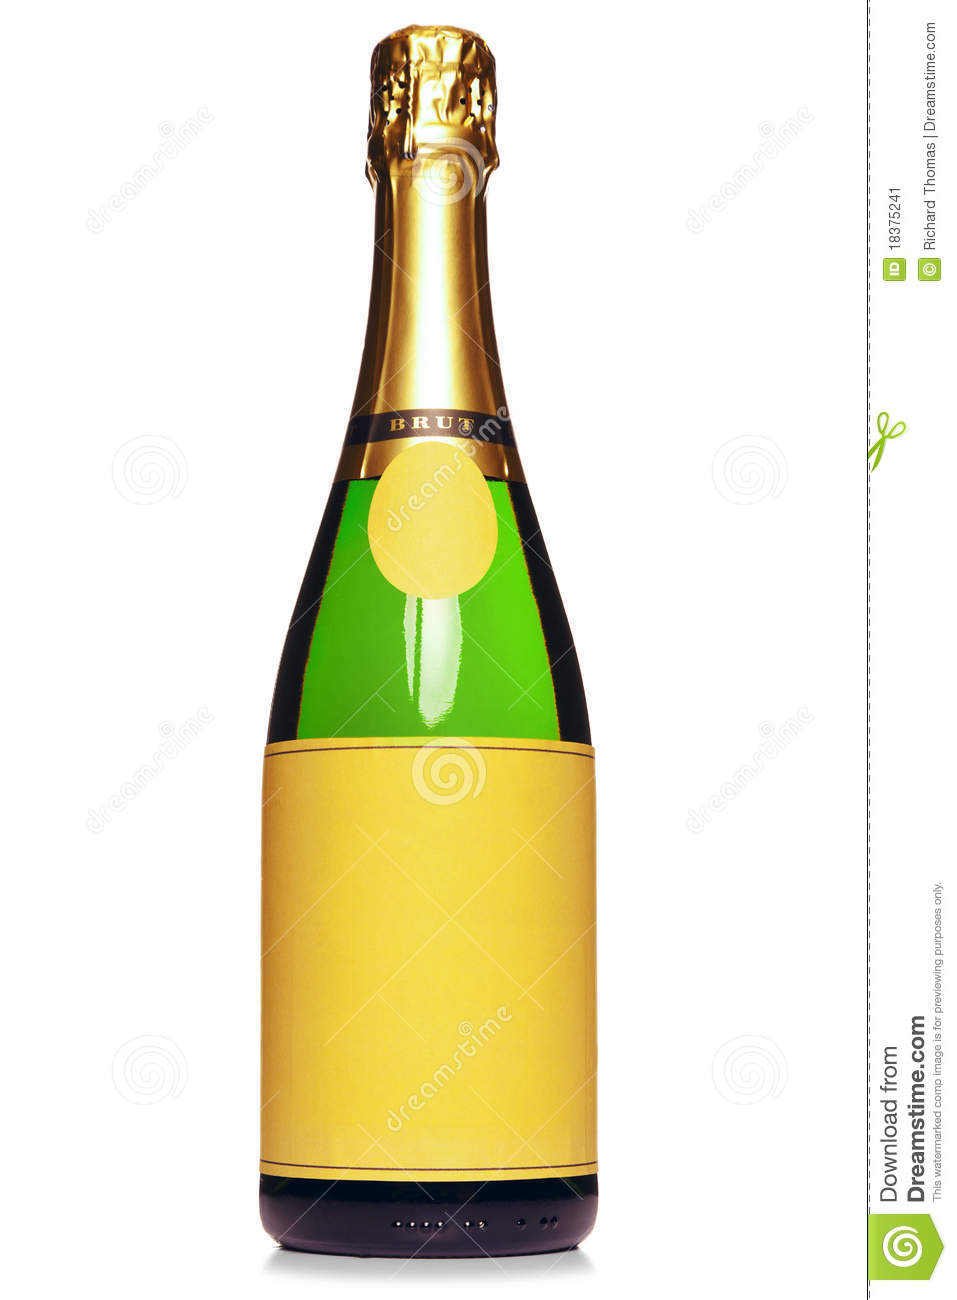 Free Champagne Bottle Cliparts, Download Free Clip Art, Free Clip.